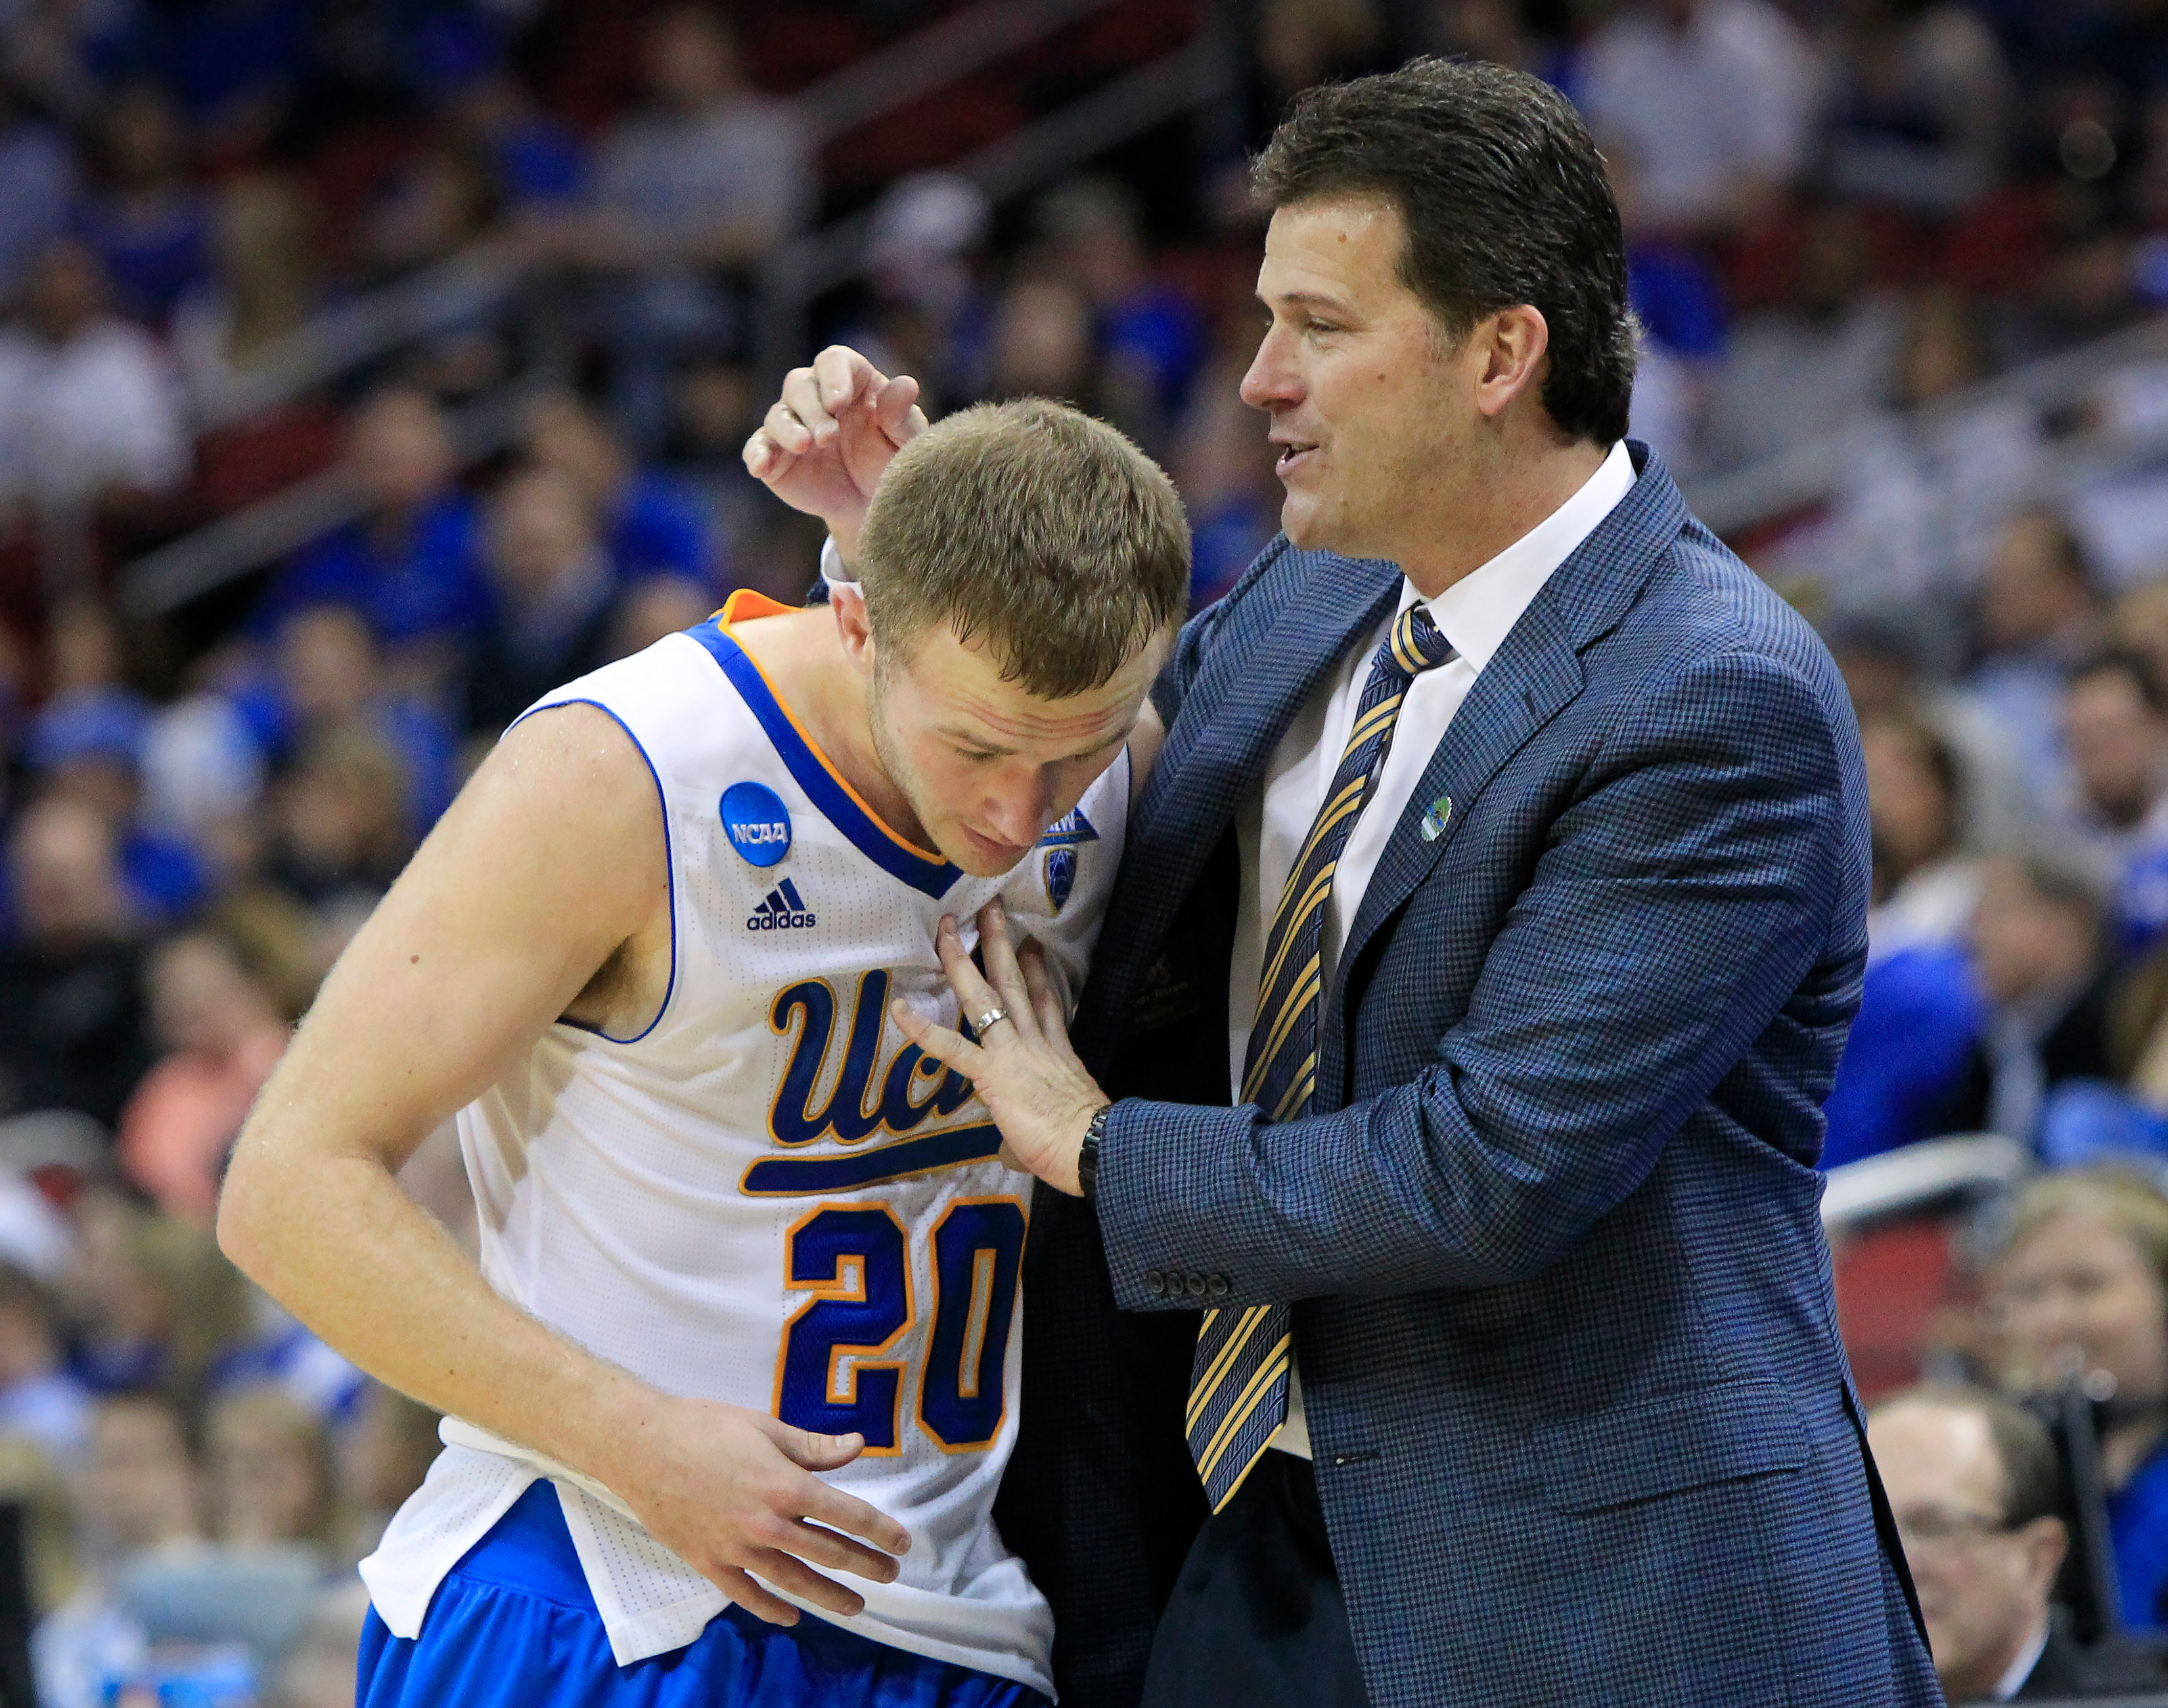 UCLA point guard Bryce Alford, the son of head coach Steve Alford, could be taken off scholarship as a senior in 2016-17. (David Stephenson/AP)